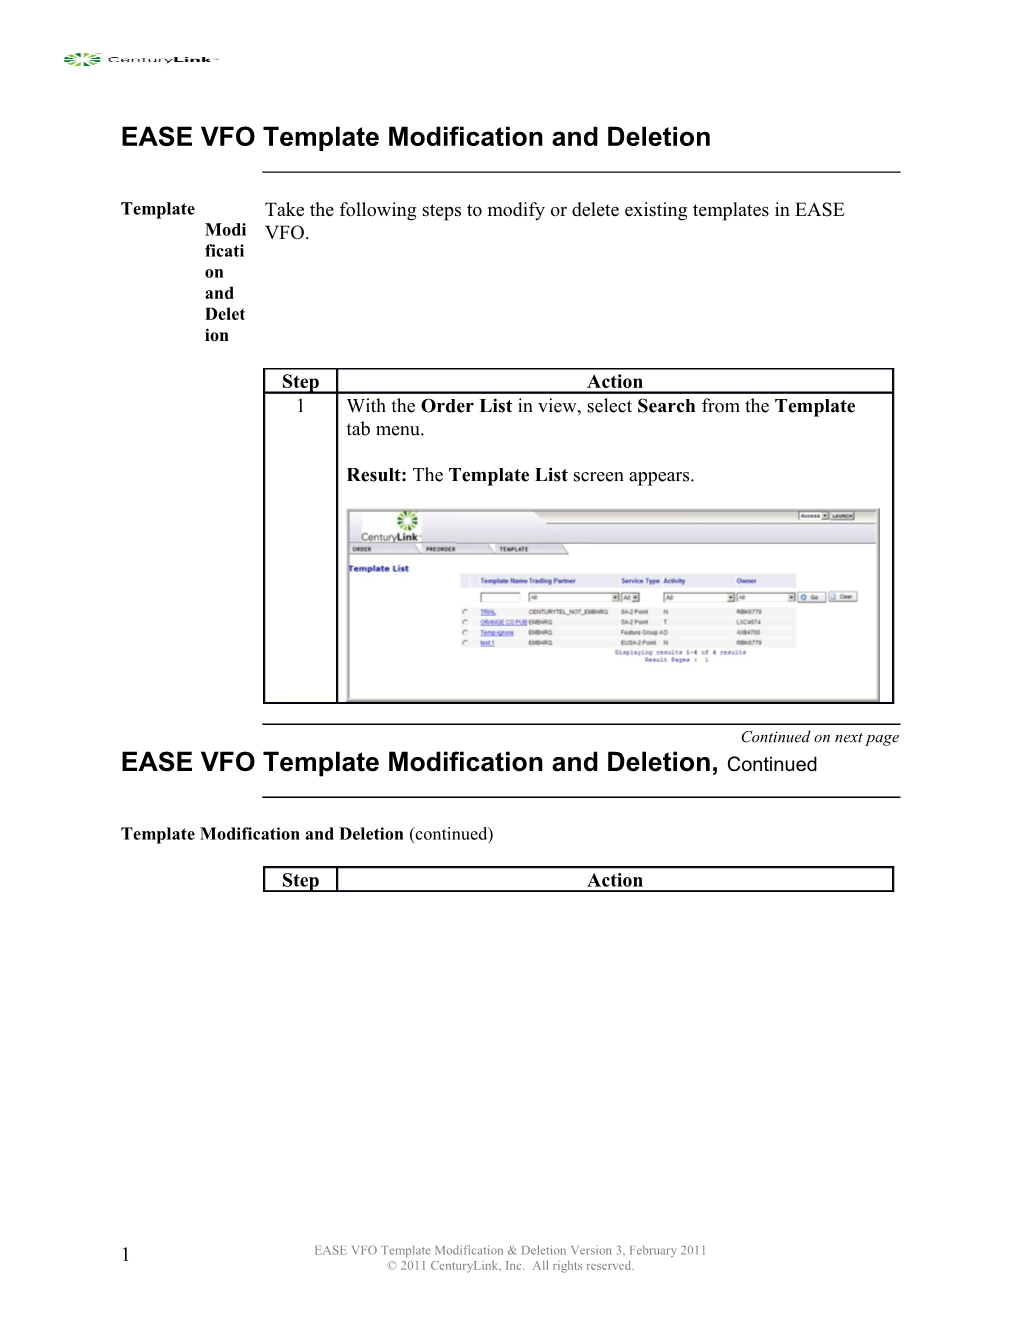 EASE VFO Templatemodification and Deletion